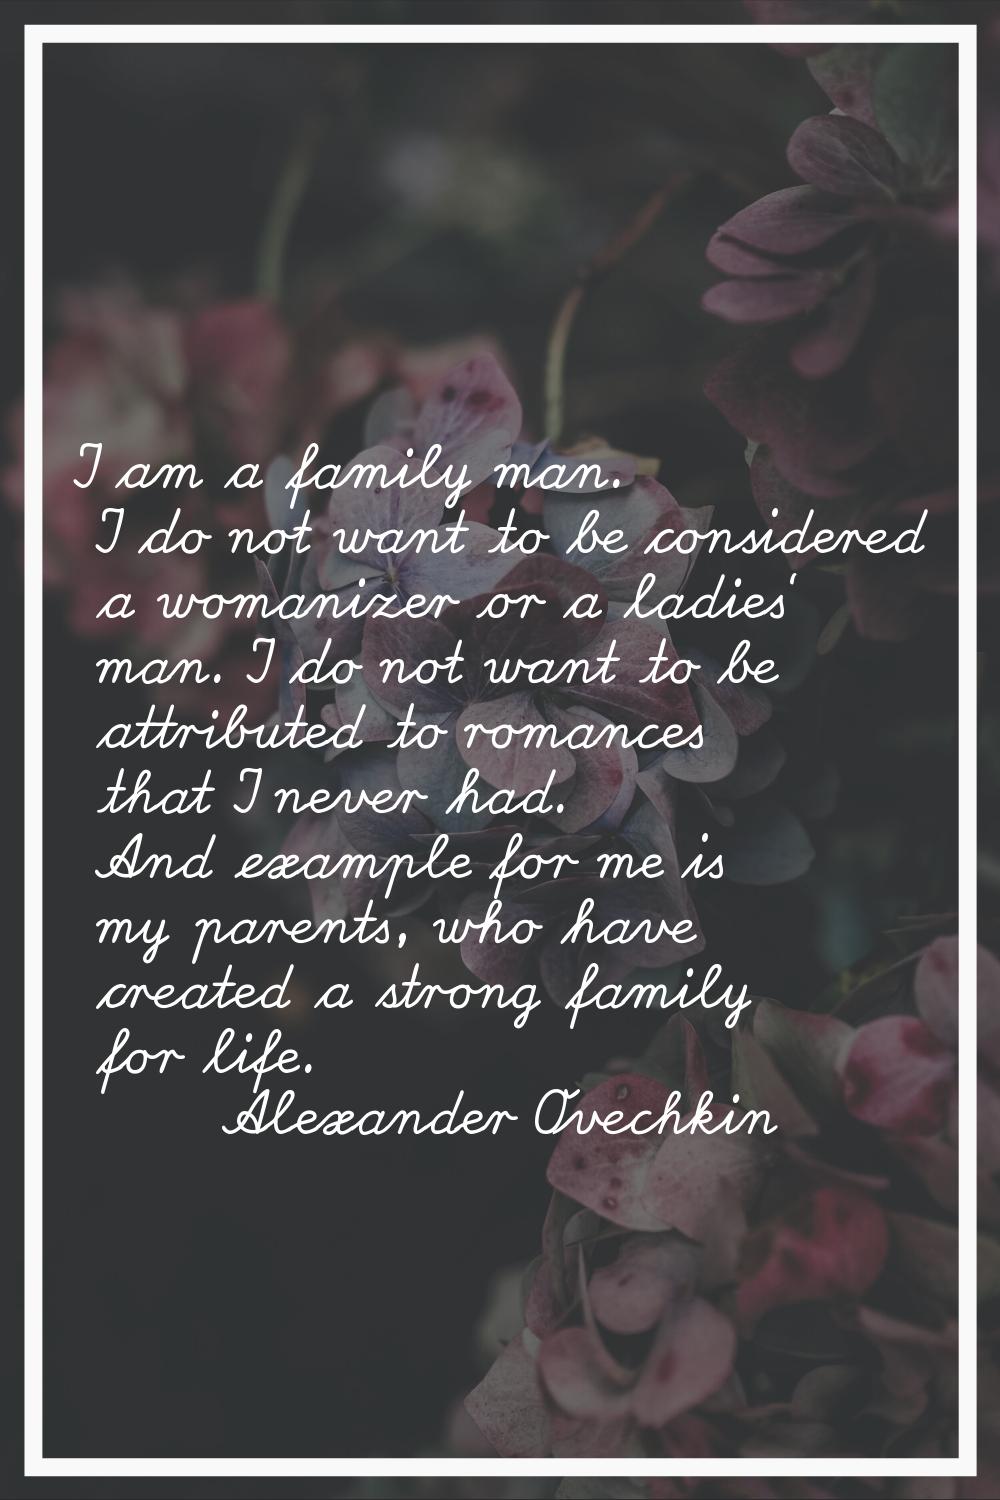 I am a family man. I do not want to be considered a womanizer or a ladies' man. I do not want to be